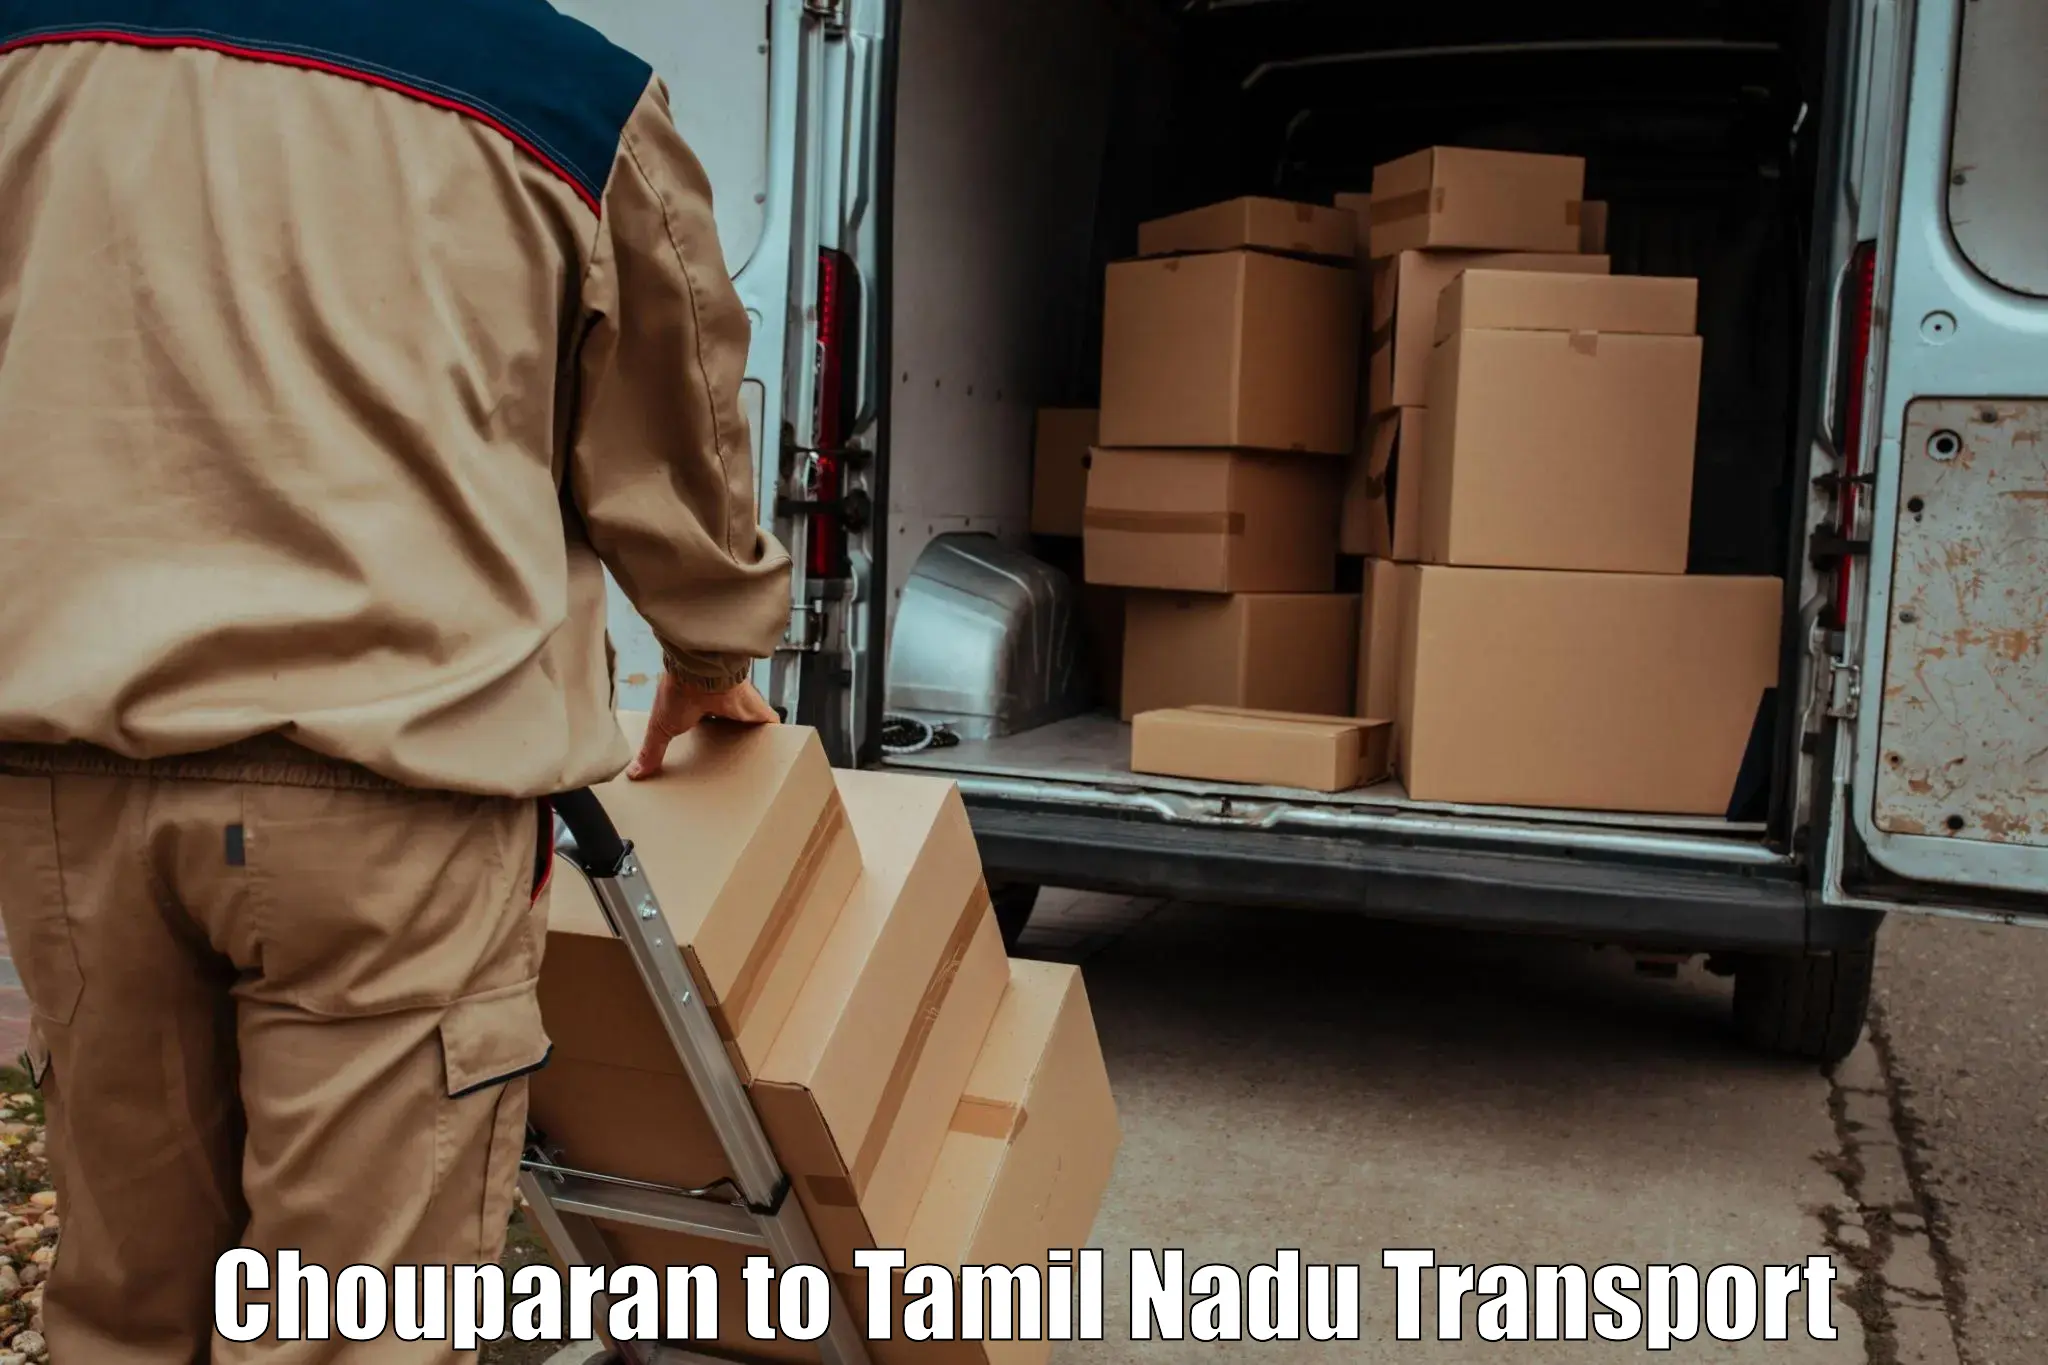 Transport bike from one state to another Chouparan to Tamil Nadu